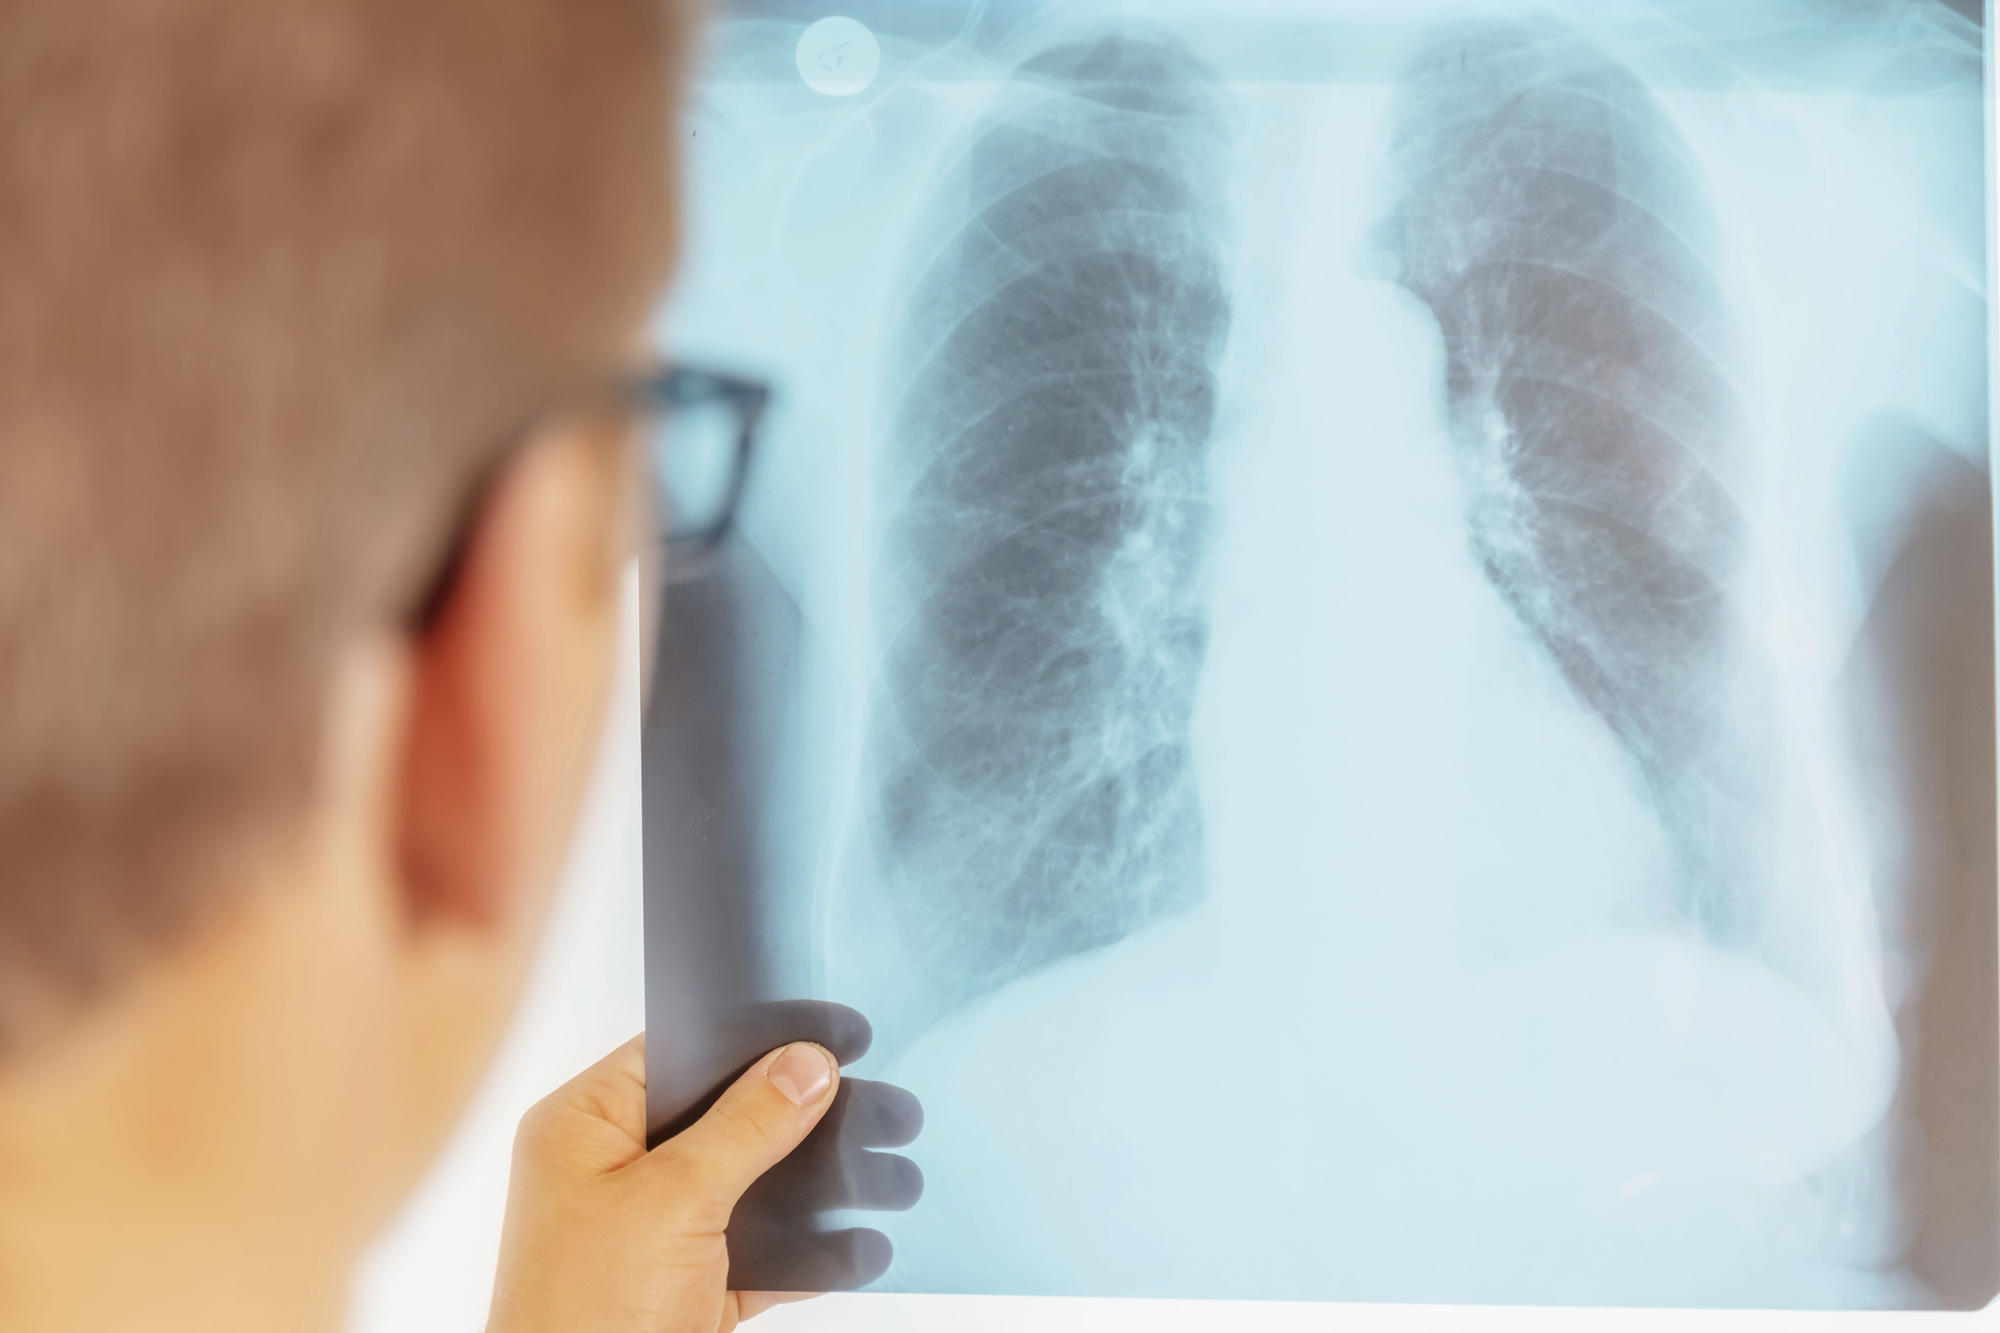 In cases of bacterial pneumonia, inflammation of the lung tissue can often be seen on patients’ X-rays. However, research has yet to be done to see what happens in the lungs when they become infected with pathogens such as pneumococci.